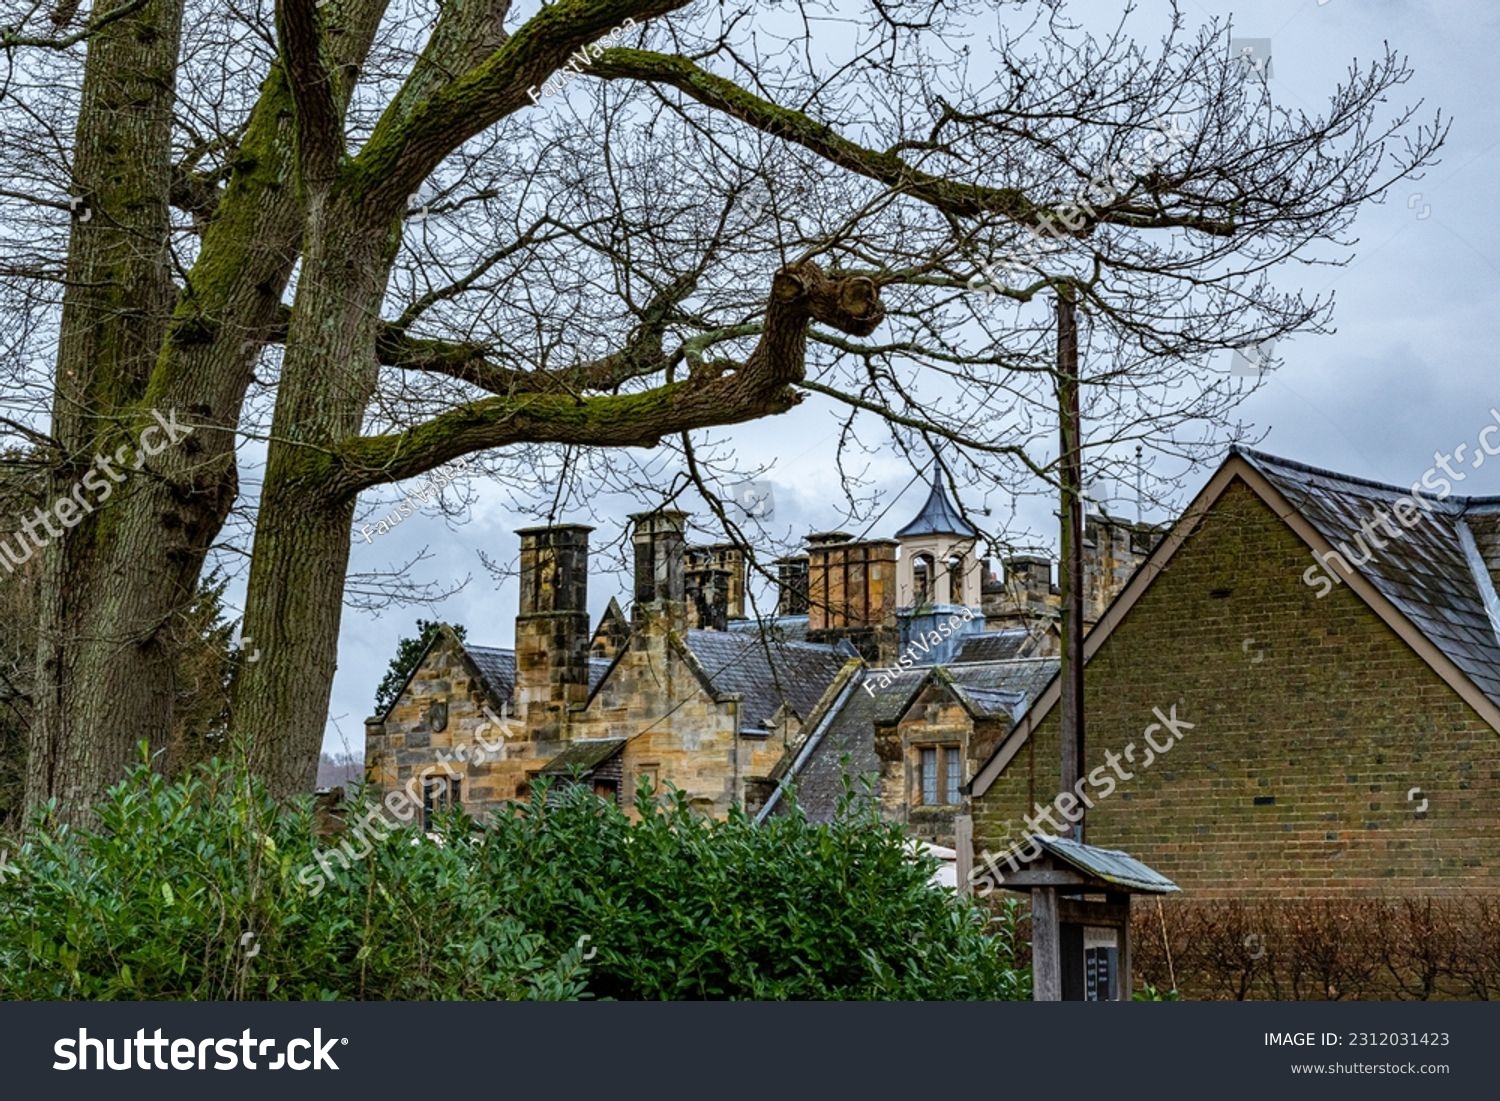 A beautiful architecture in England, hidden in the forest  #2312031423